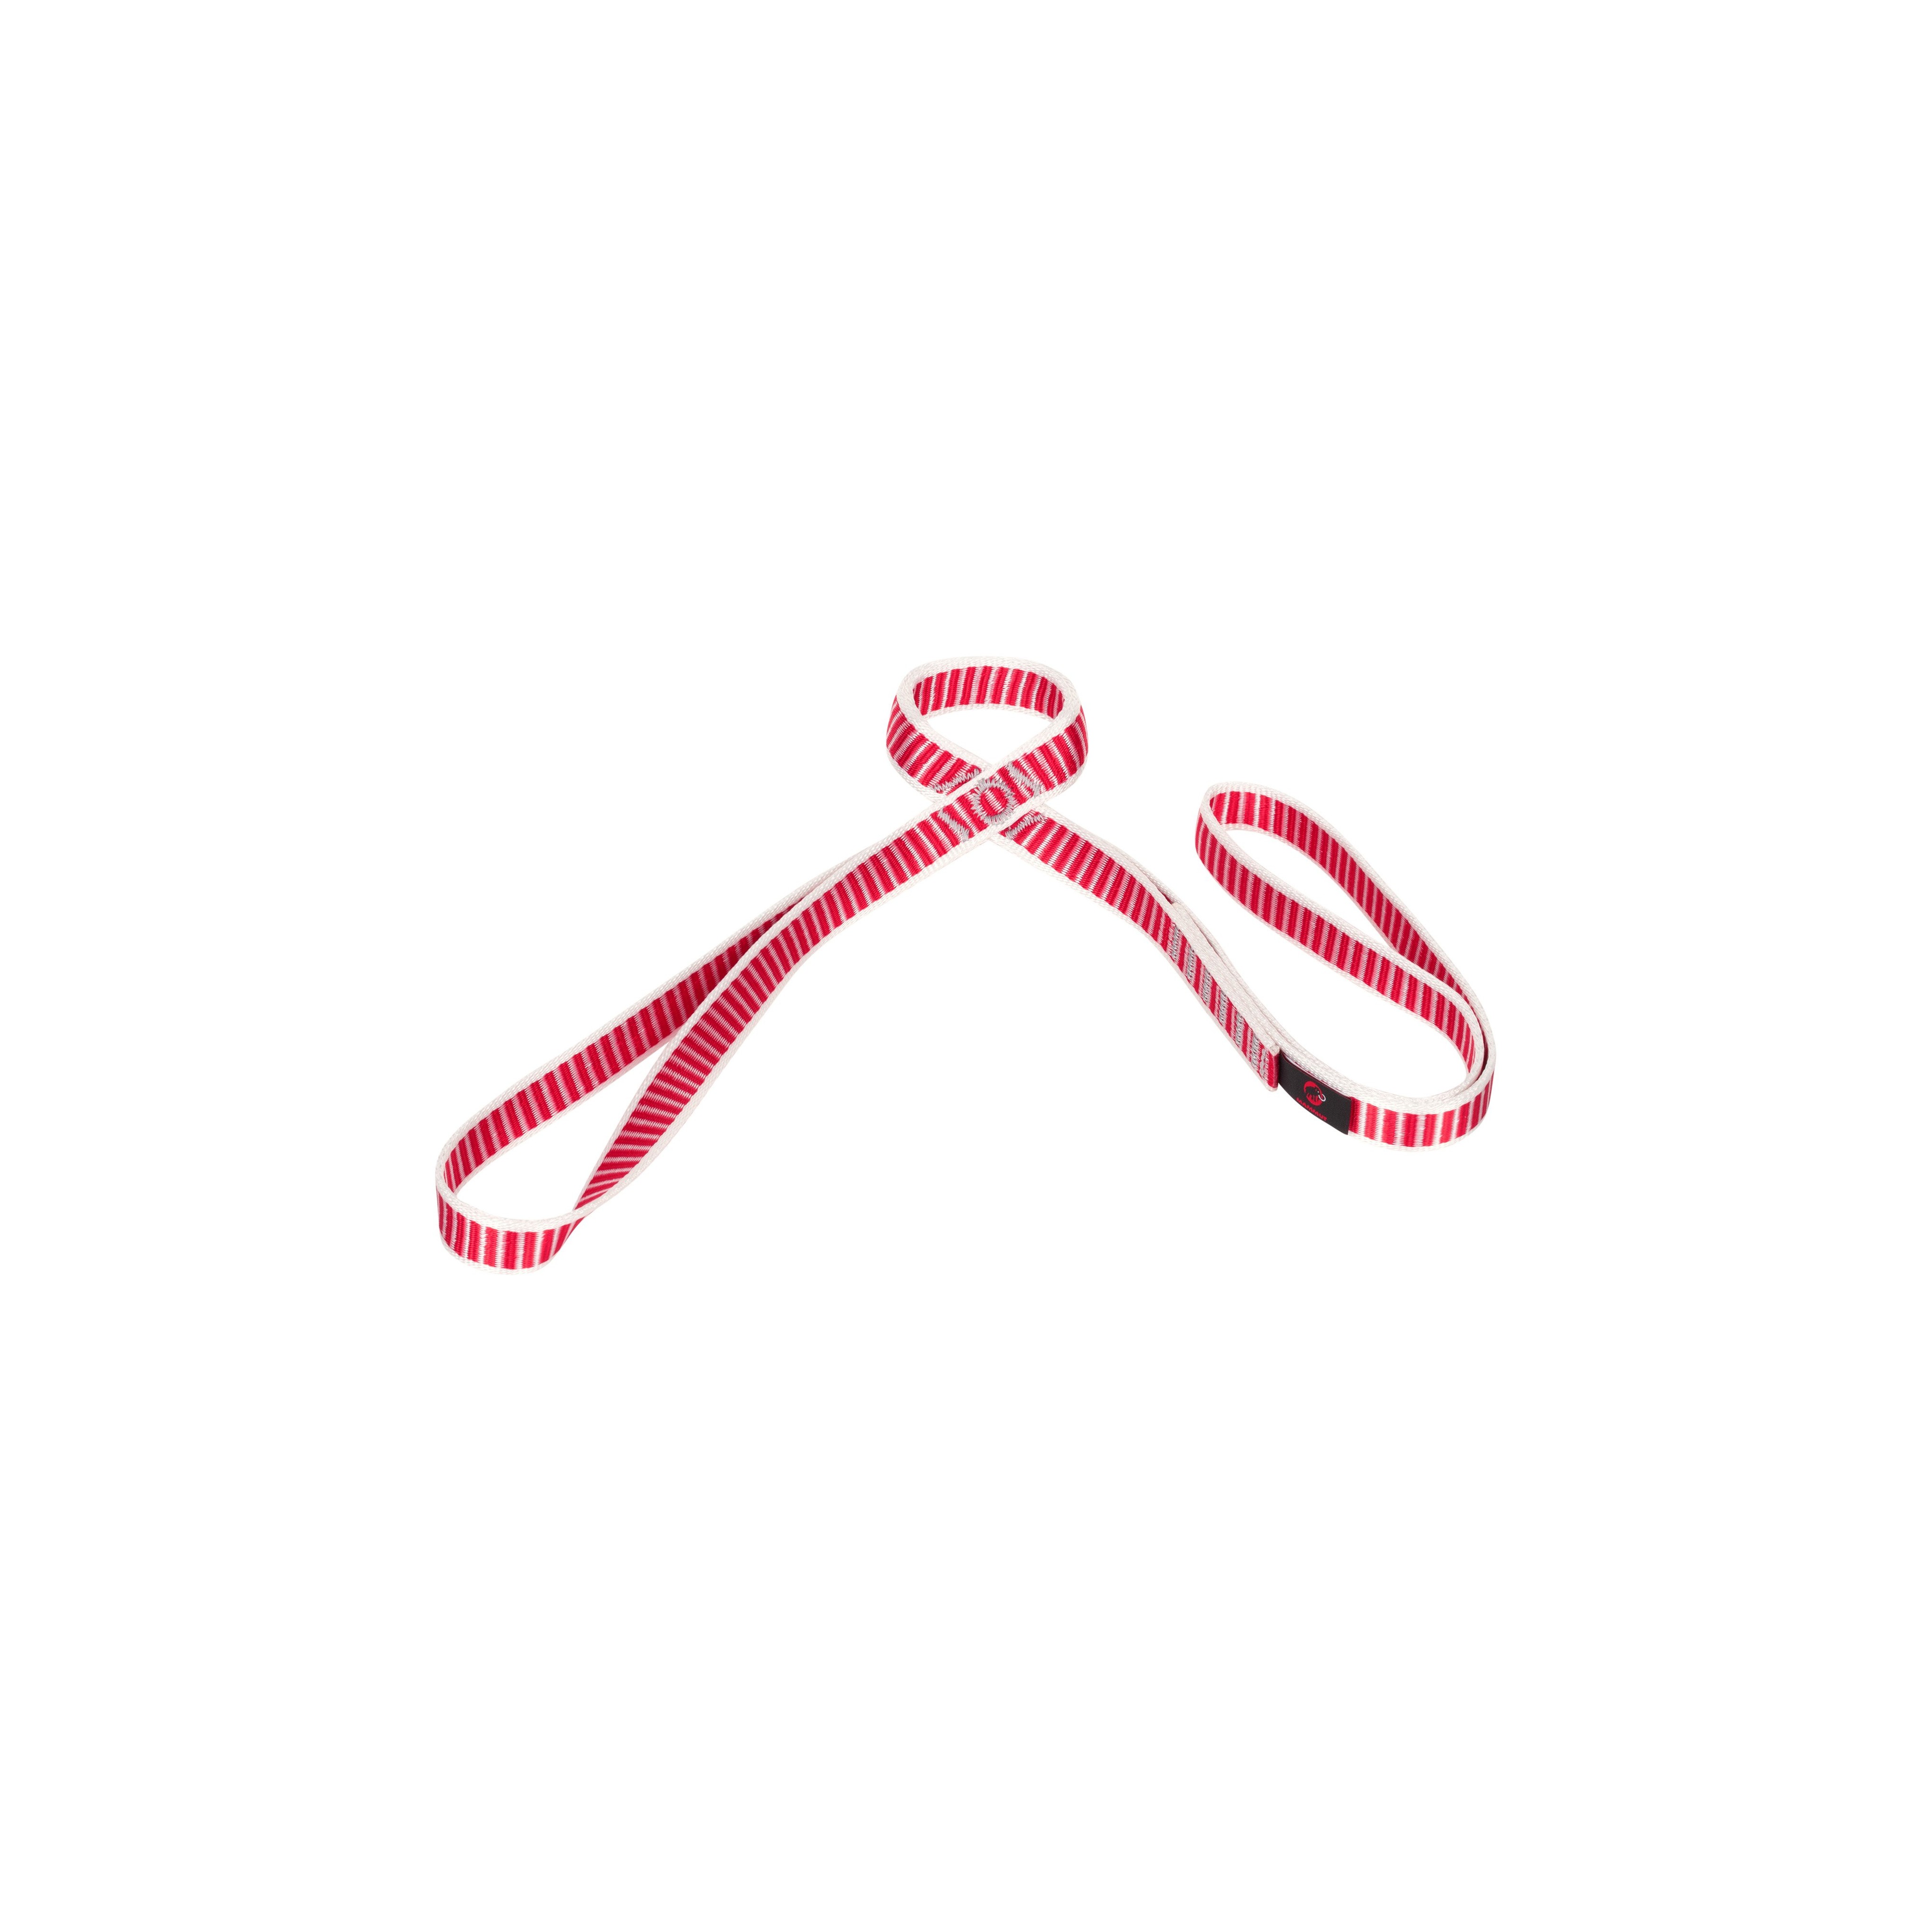 Belay Sling 19.0 - red-white, 65 cm product image